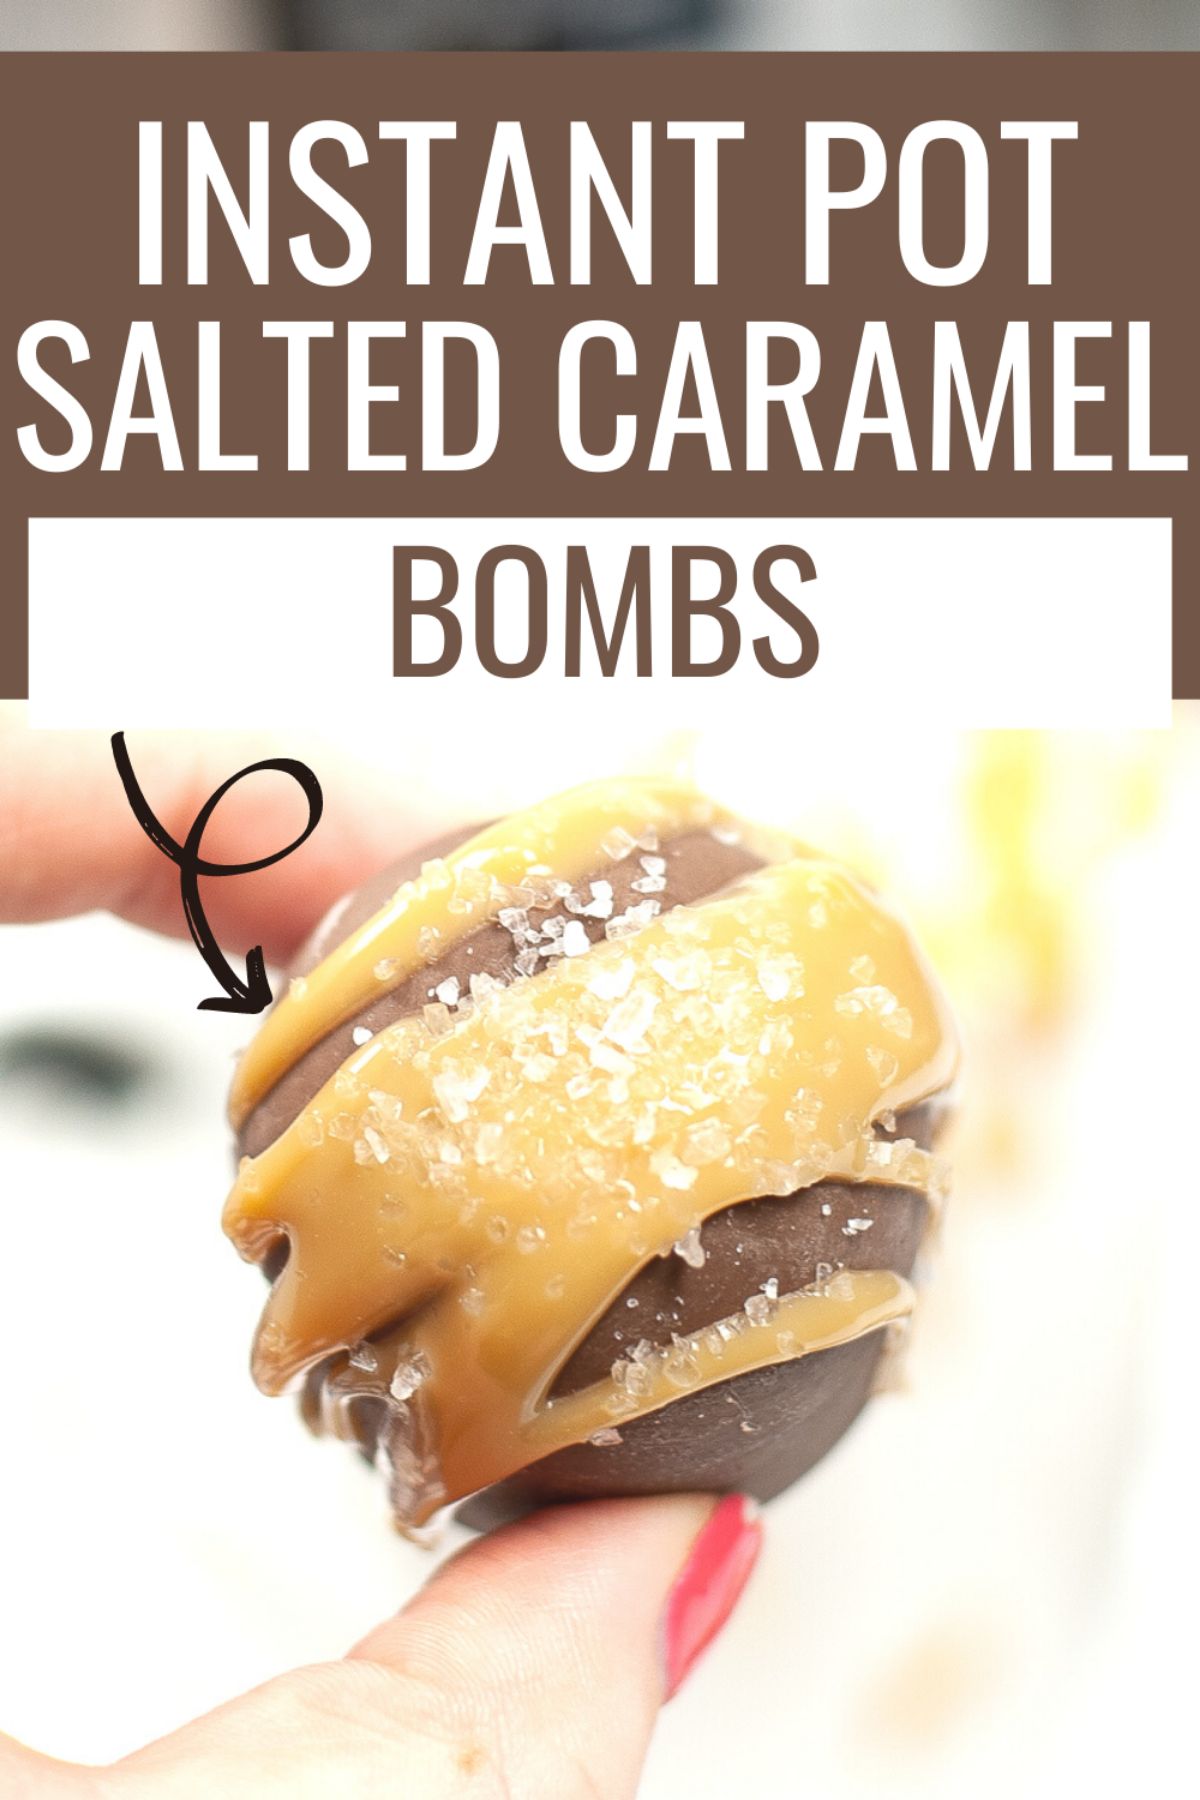 Instant Pot Salted Caramel Hot Cocoa Bombs are the perfect mixture of sweet and salty. They're a great budget-friendly homemade gift. #instantpot #pressurecooker #hotcocoabombs #cocoabombs #saltedcaramel via @wondermomwannab